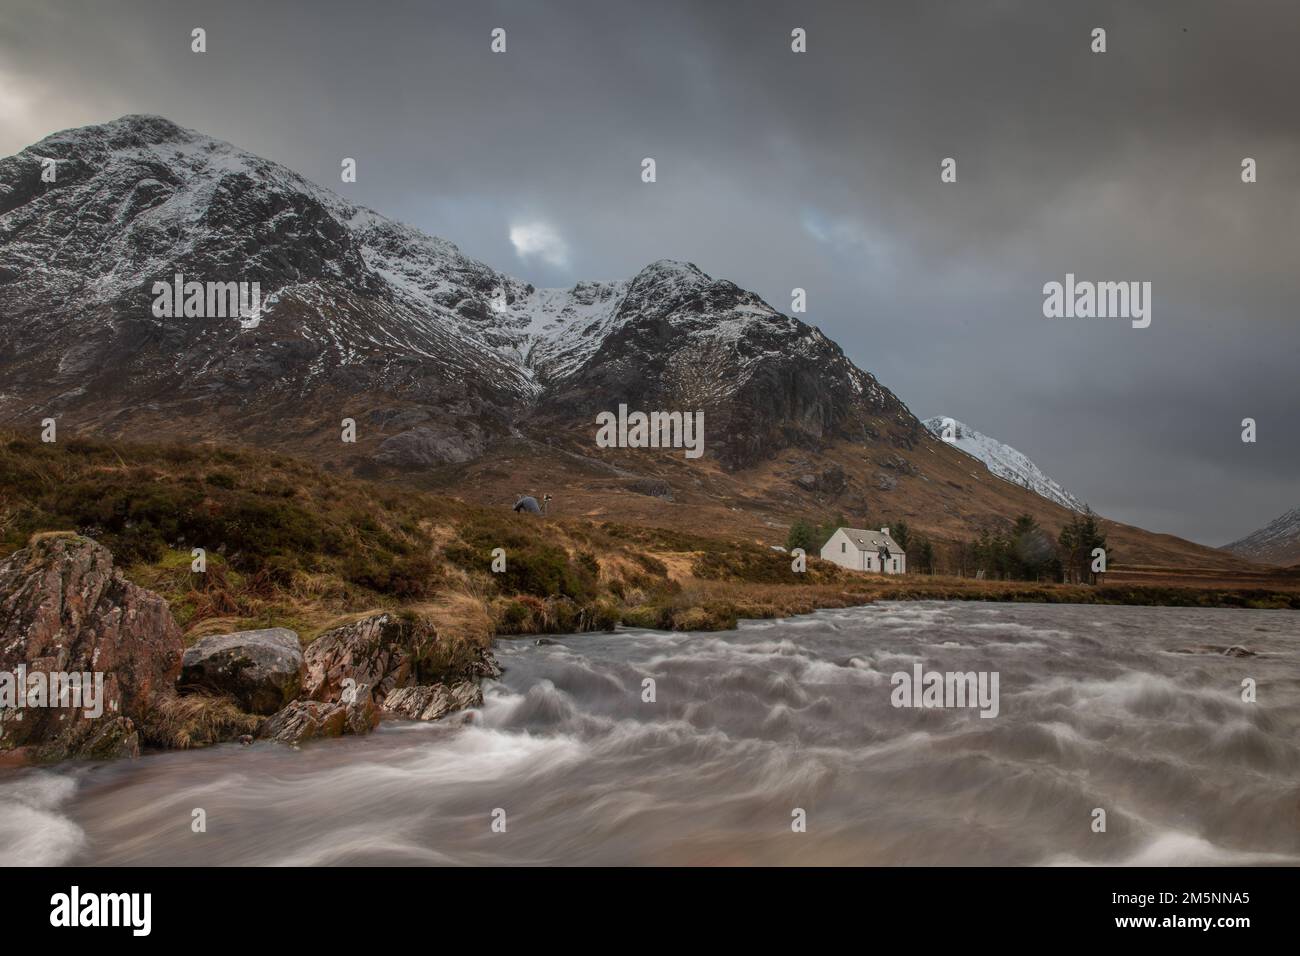 Glencoe in the Scottish Highlands. Rugged scenery and landscapes in the mountains near Loch Ness and Fort William. Stock Photo